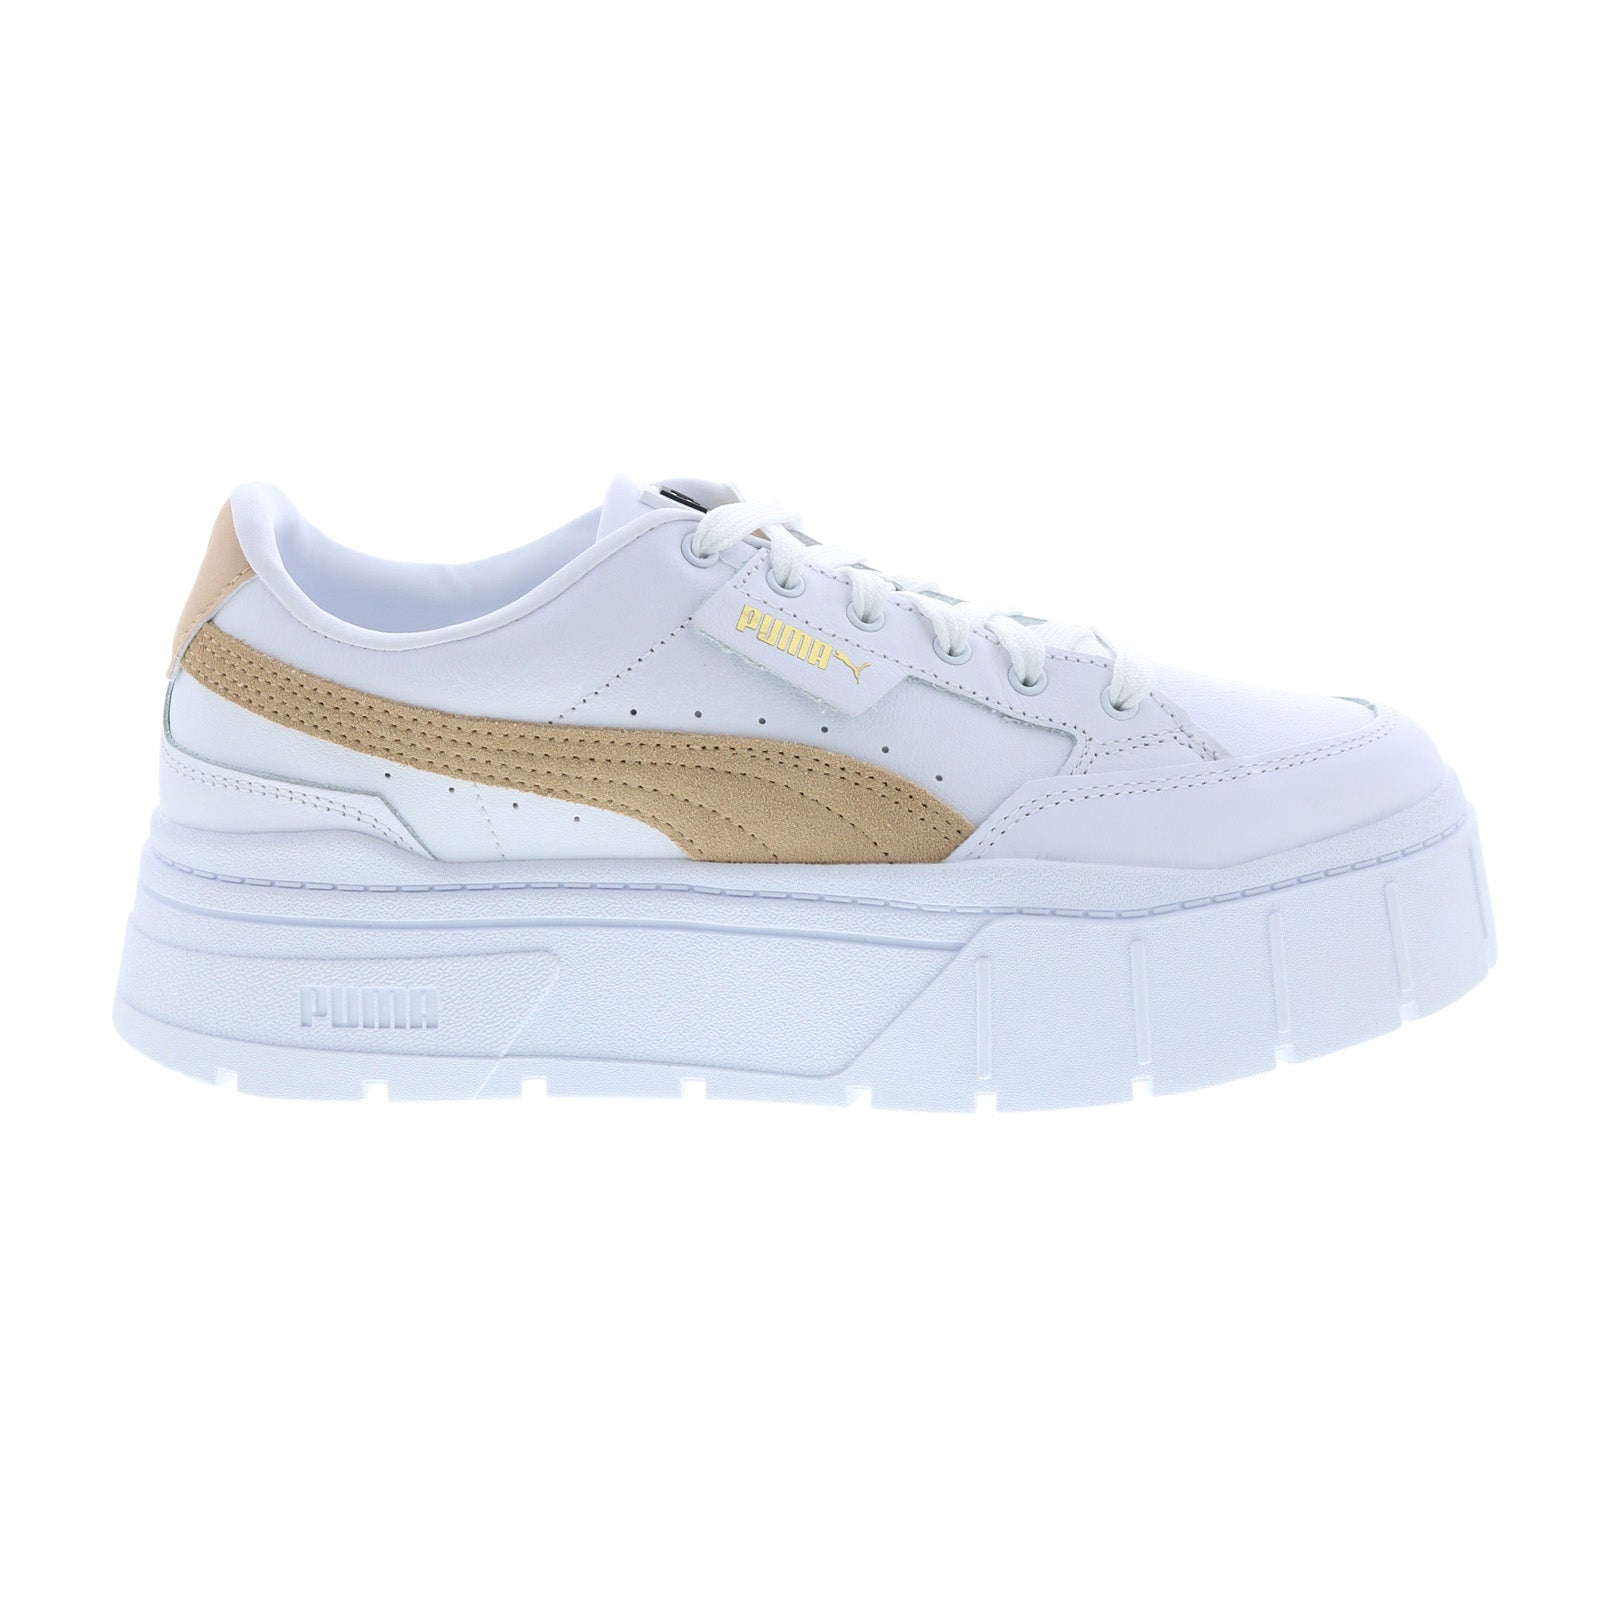 Puma Mayze Stack 38436303 Womens White Leather Lifestyle Sneakers Ruze Shoes